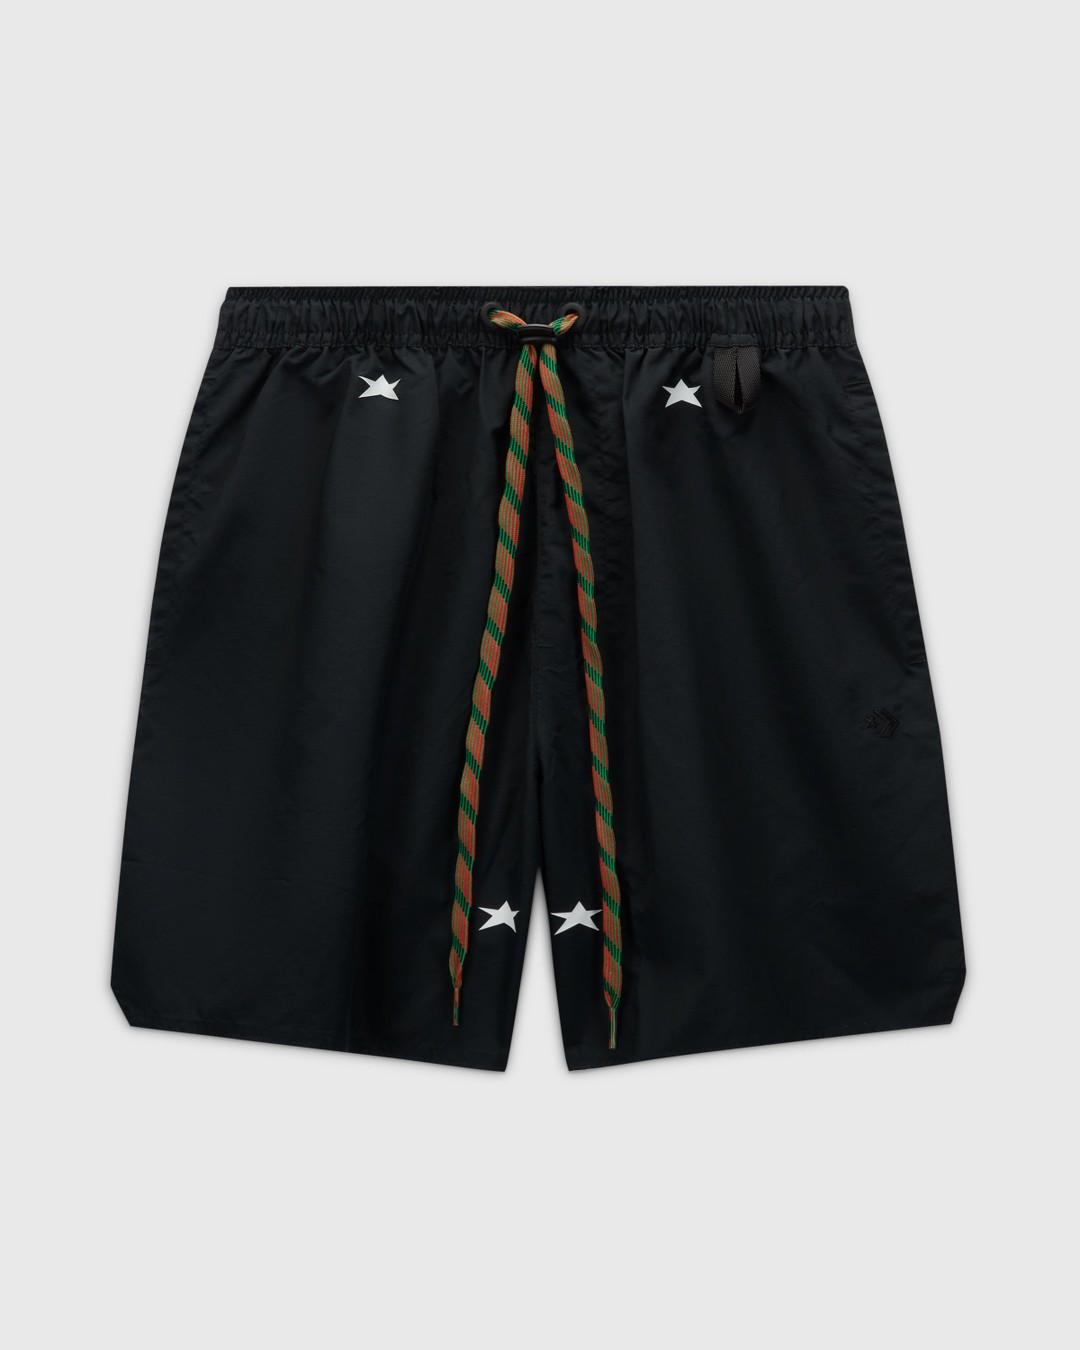 Converse x Barriers – Court Ready Cutter Shorts Black - Active Shorts - Black - Image 1